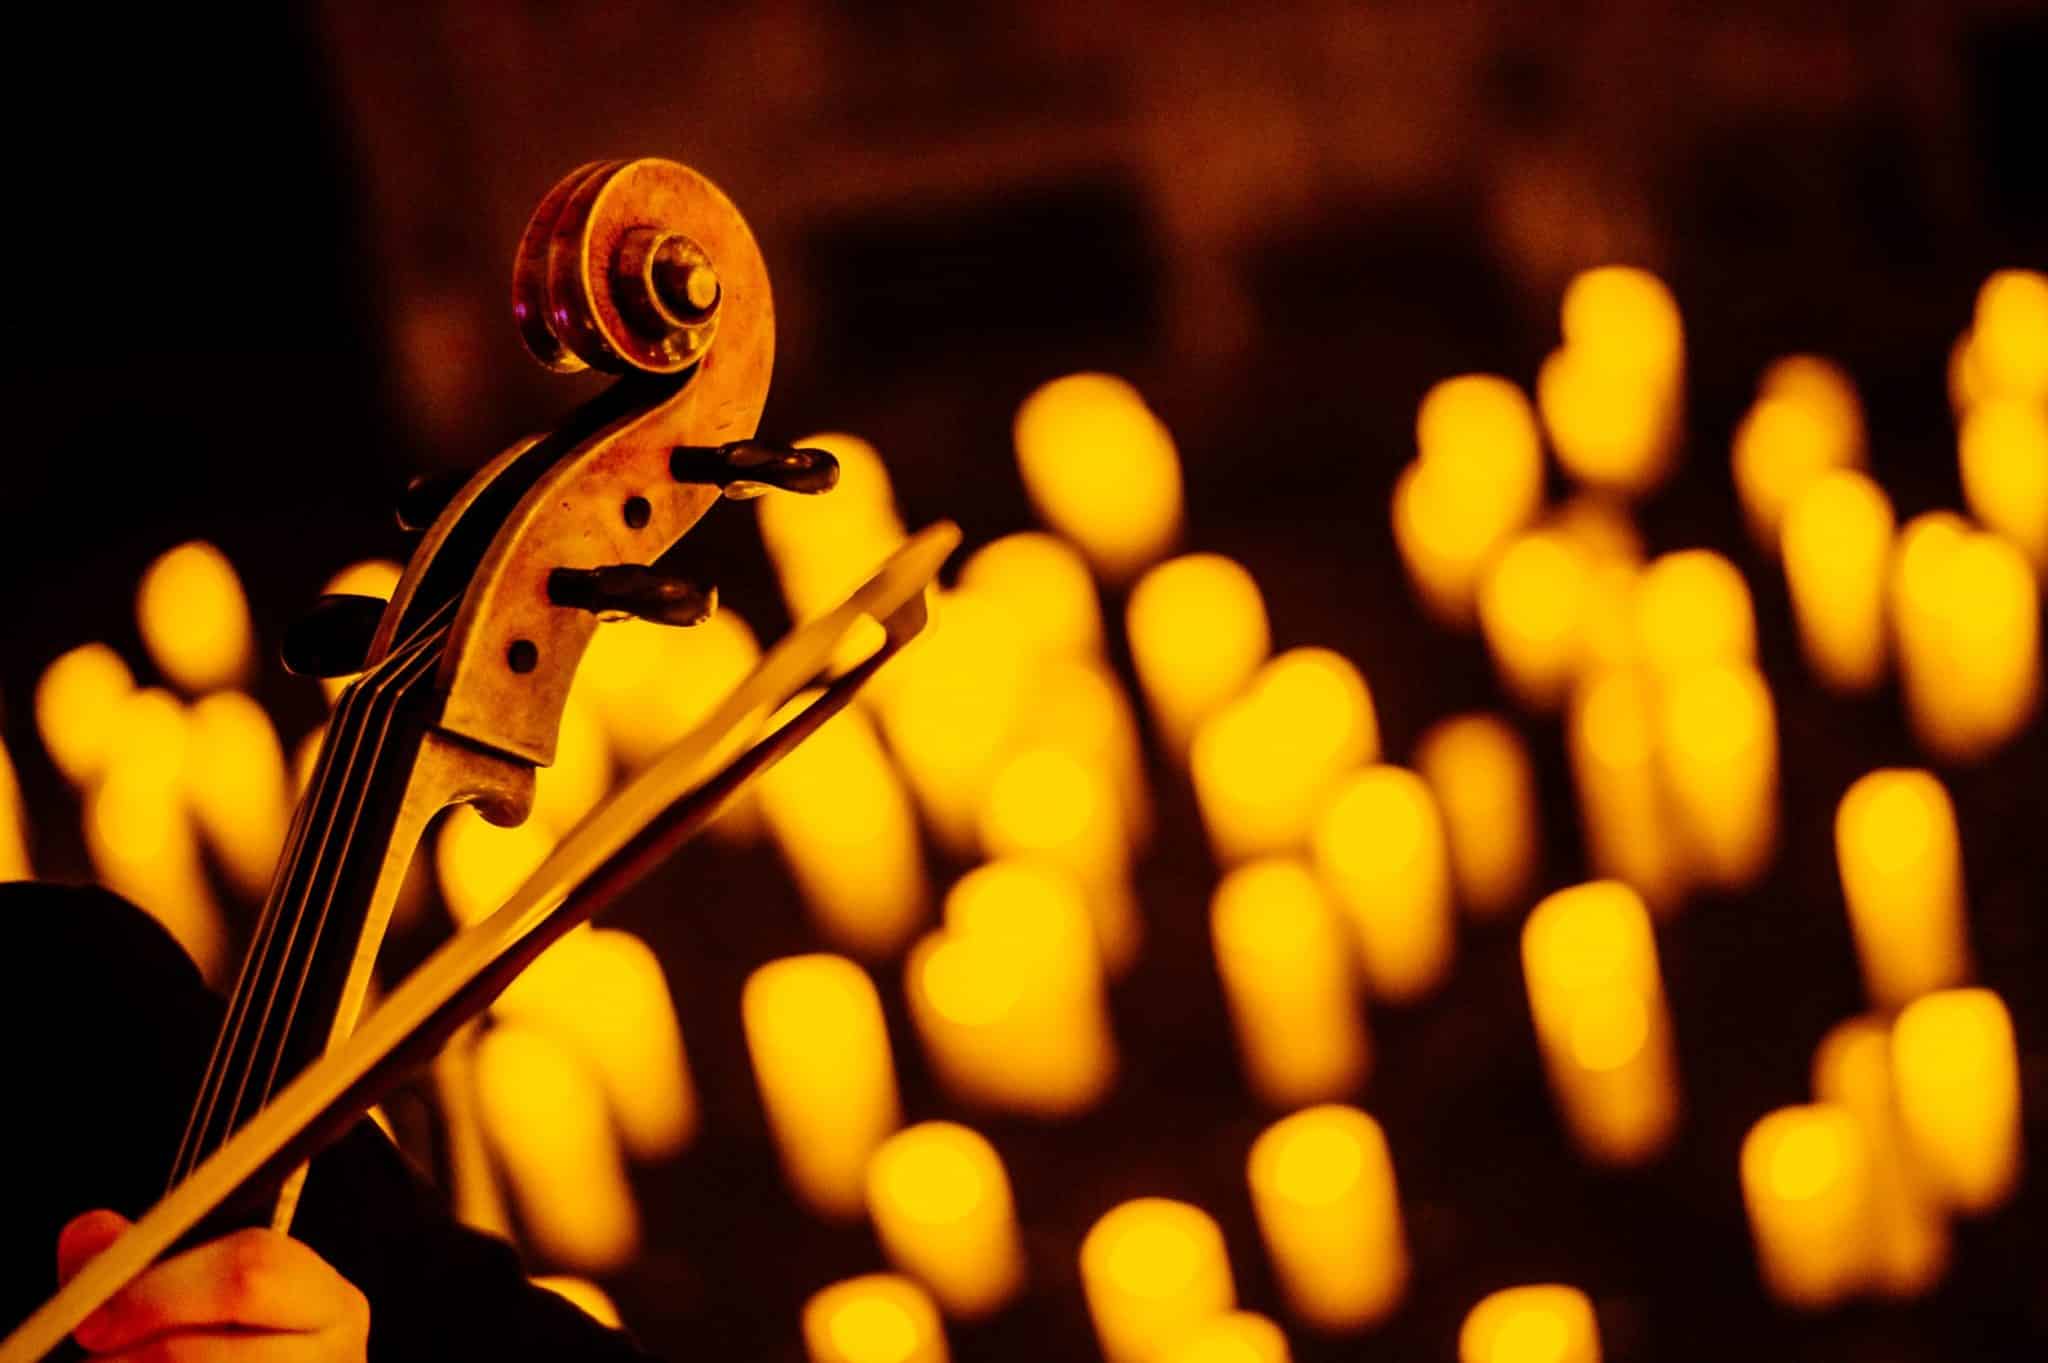 The top of a string instrument and bow is visible with the blurry image of candles in the background at a Candlelight concert.